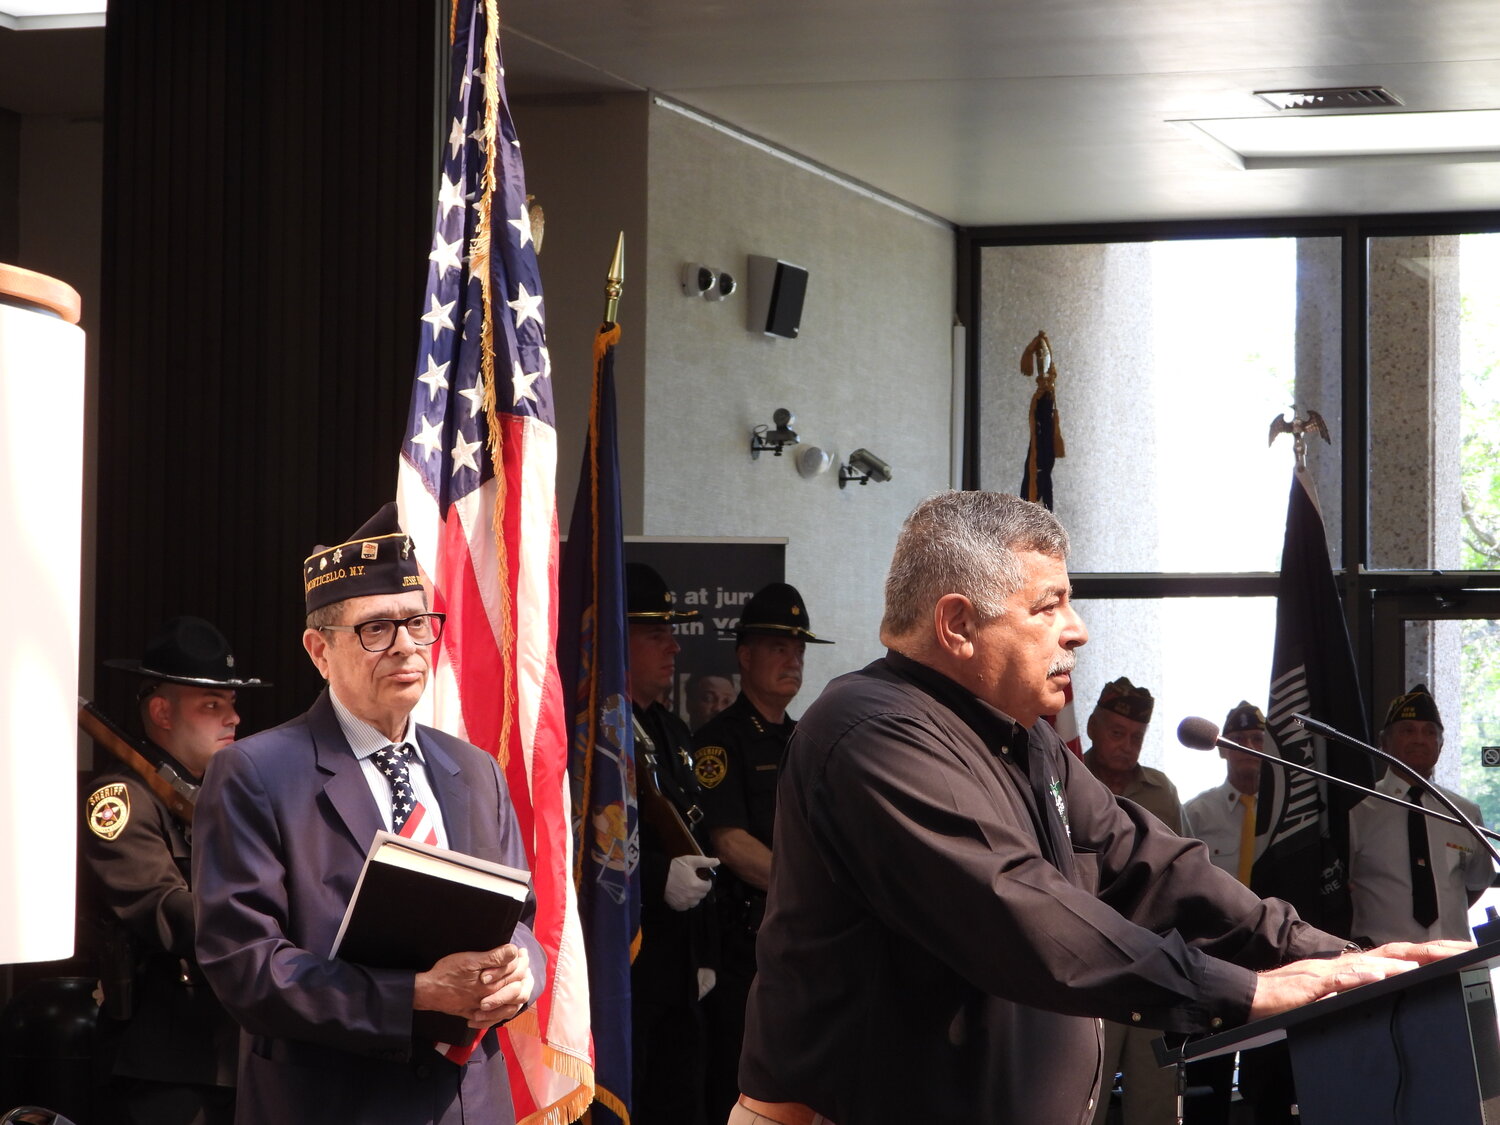 Guest Speaker Luis Alvarez, Sullivan County Legislator, spoke on his thoughts and personal military history on Memorial Day.